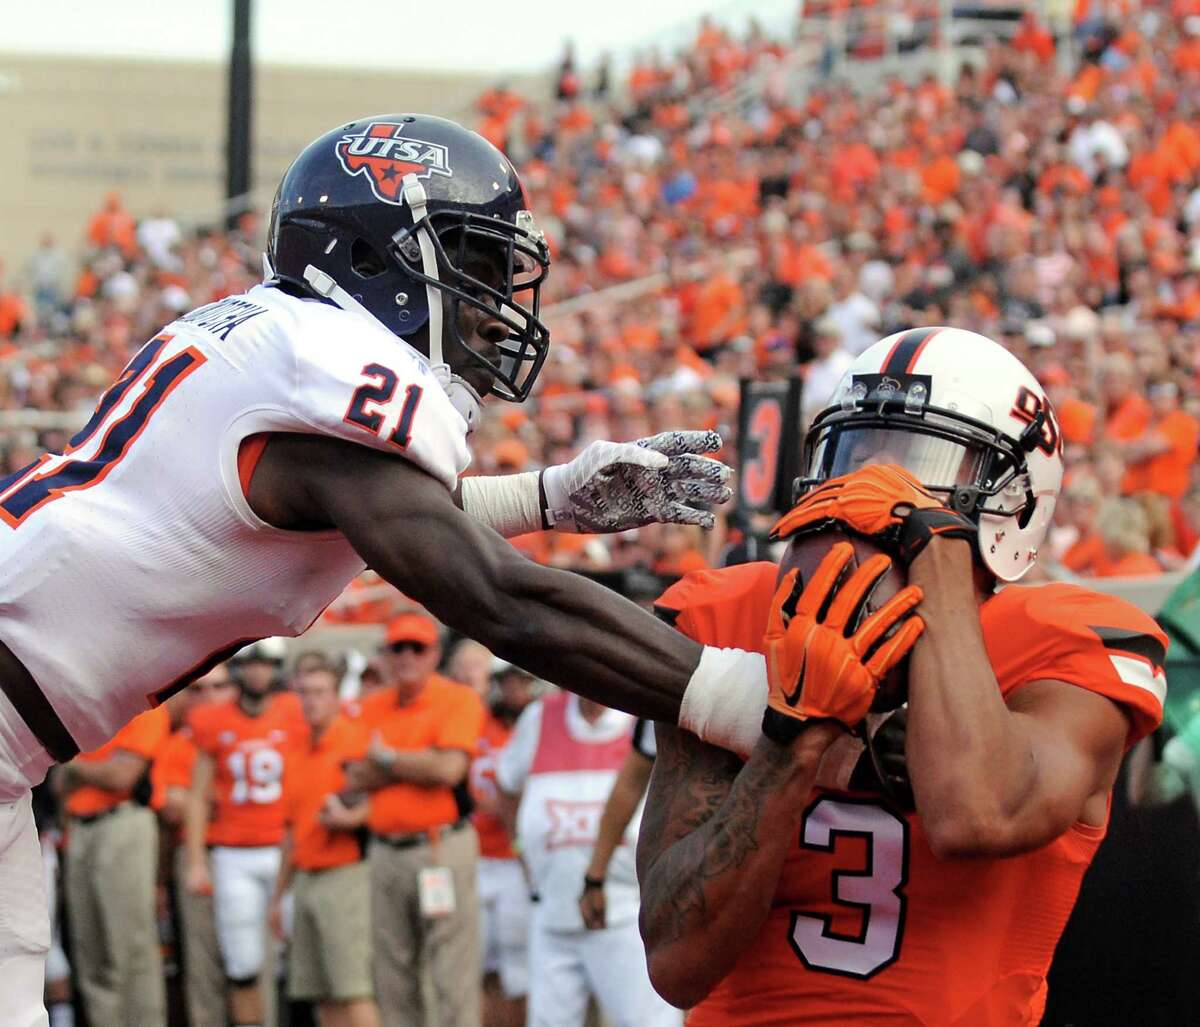 Oklahoma State wide receiver Marcell Ateman (right) catches a 13-yard touchdown pass in front of UTSA cornerback Bennett Okotcha during Saturday’s game in Stillwater, Oklahoma. The 55-point loss was the worst in program history.